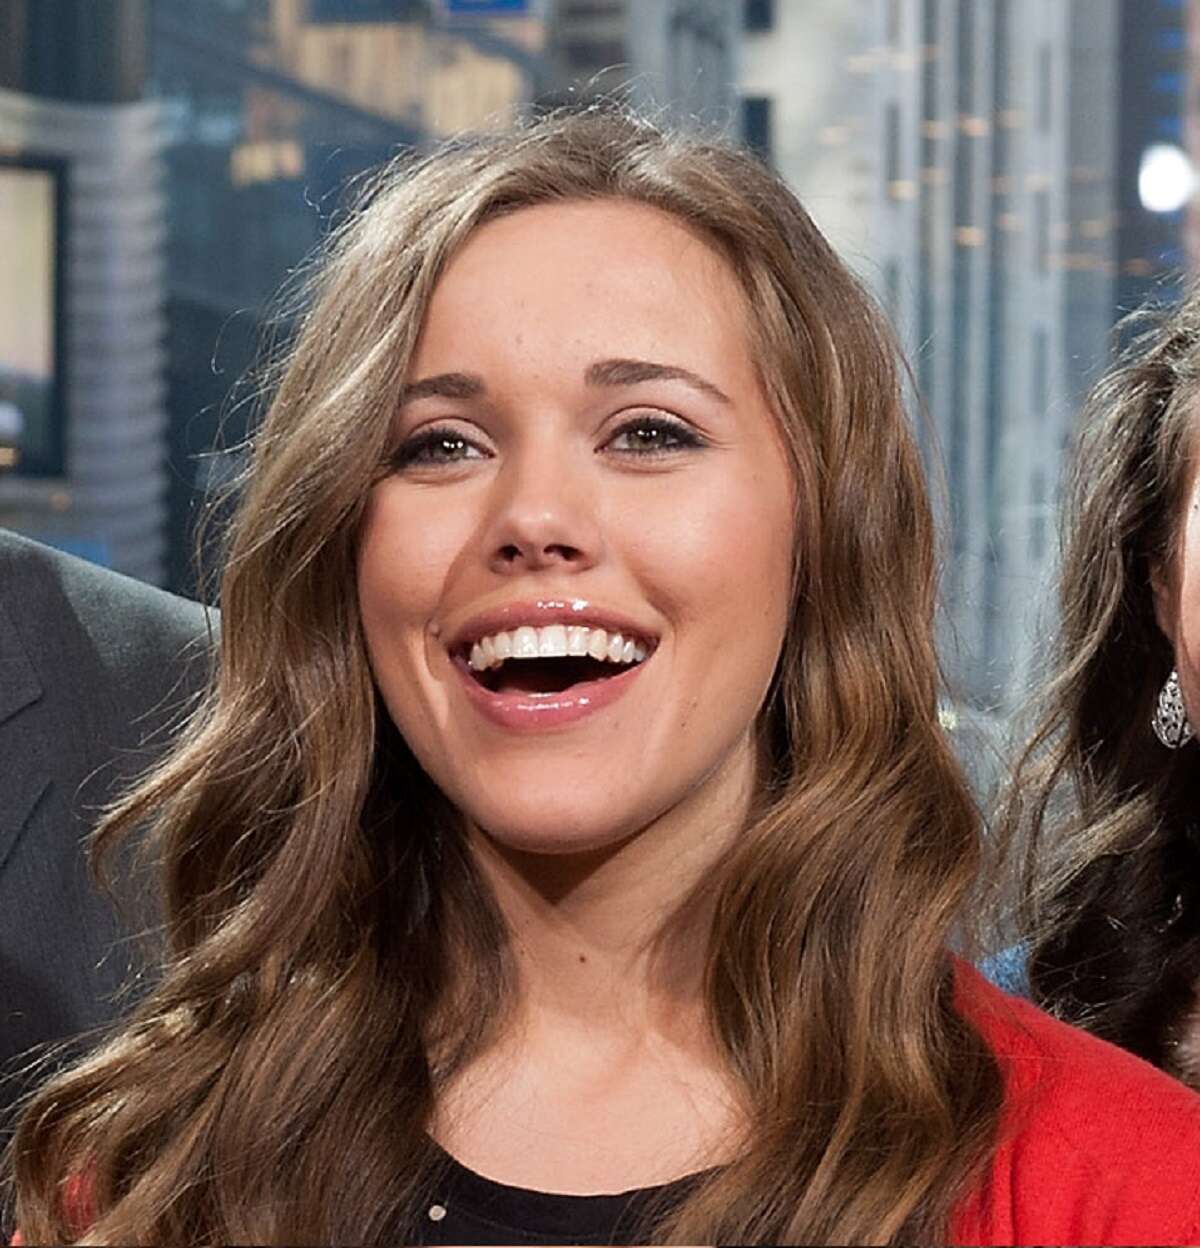 Jessa Seewald is seen at 'Extra' studios in New York in 2014